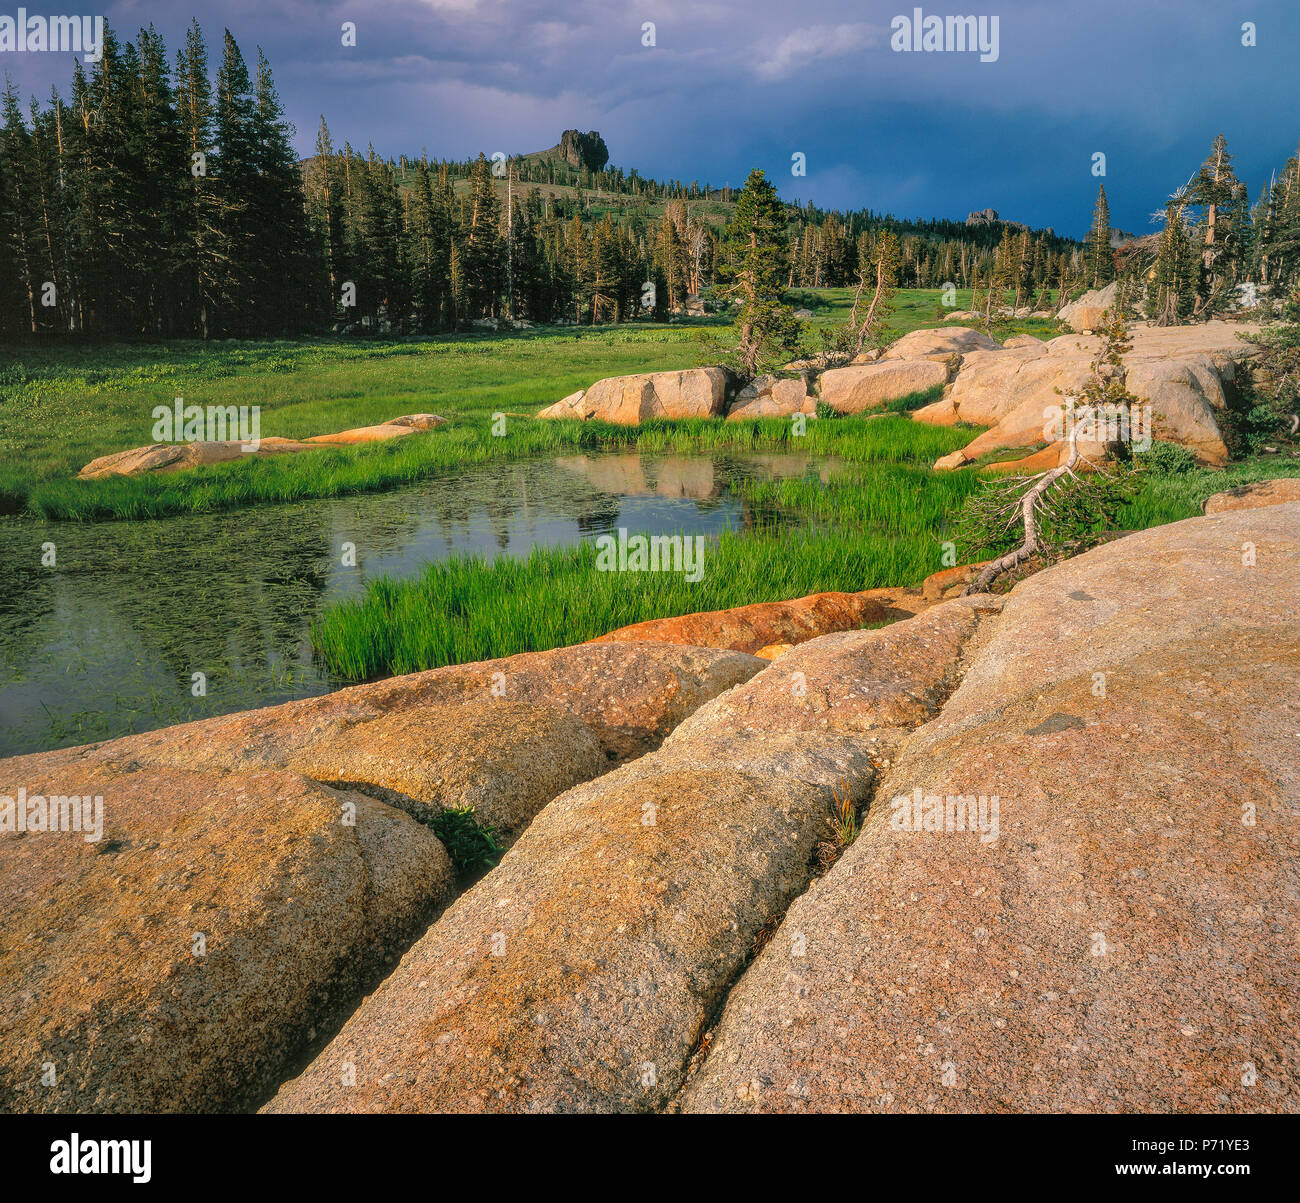 Granite, Horse Meadow, Emigrant Wilderness, Stanislaus National Forest, Sierra Nevada Mountains, California Stock Photo